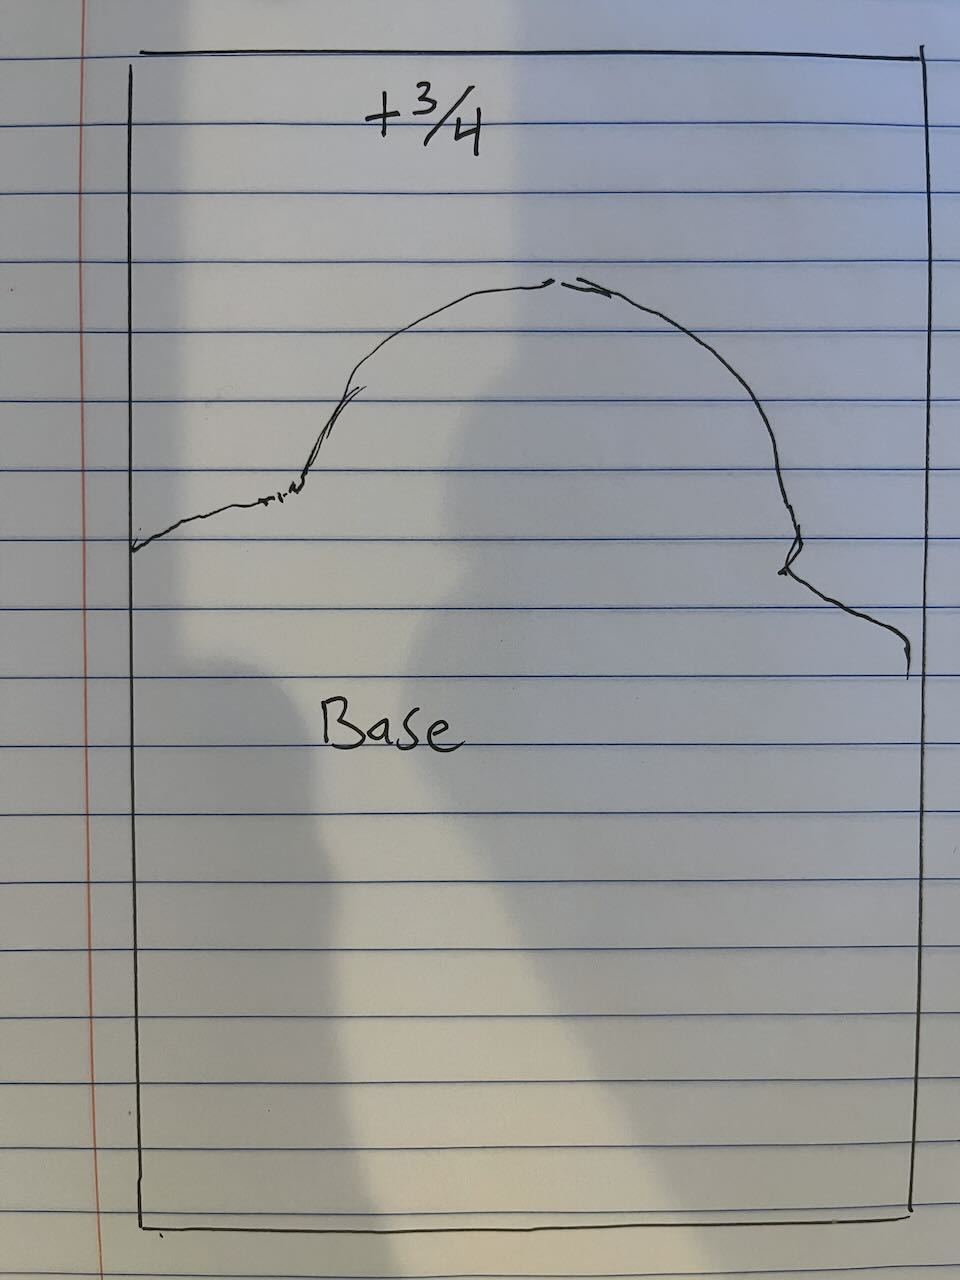 A photo of a piece of notepaper with a rectangle drawn on it. A curved line bisects the rectangle. The lower section is labeled "Base" and the upper section is labeled "+3/4"